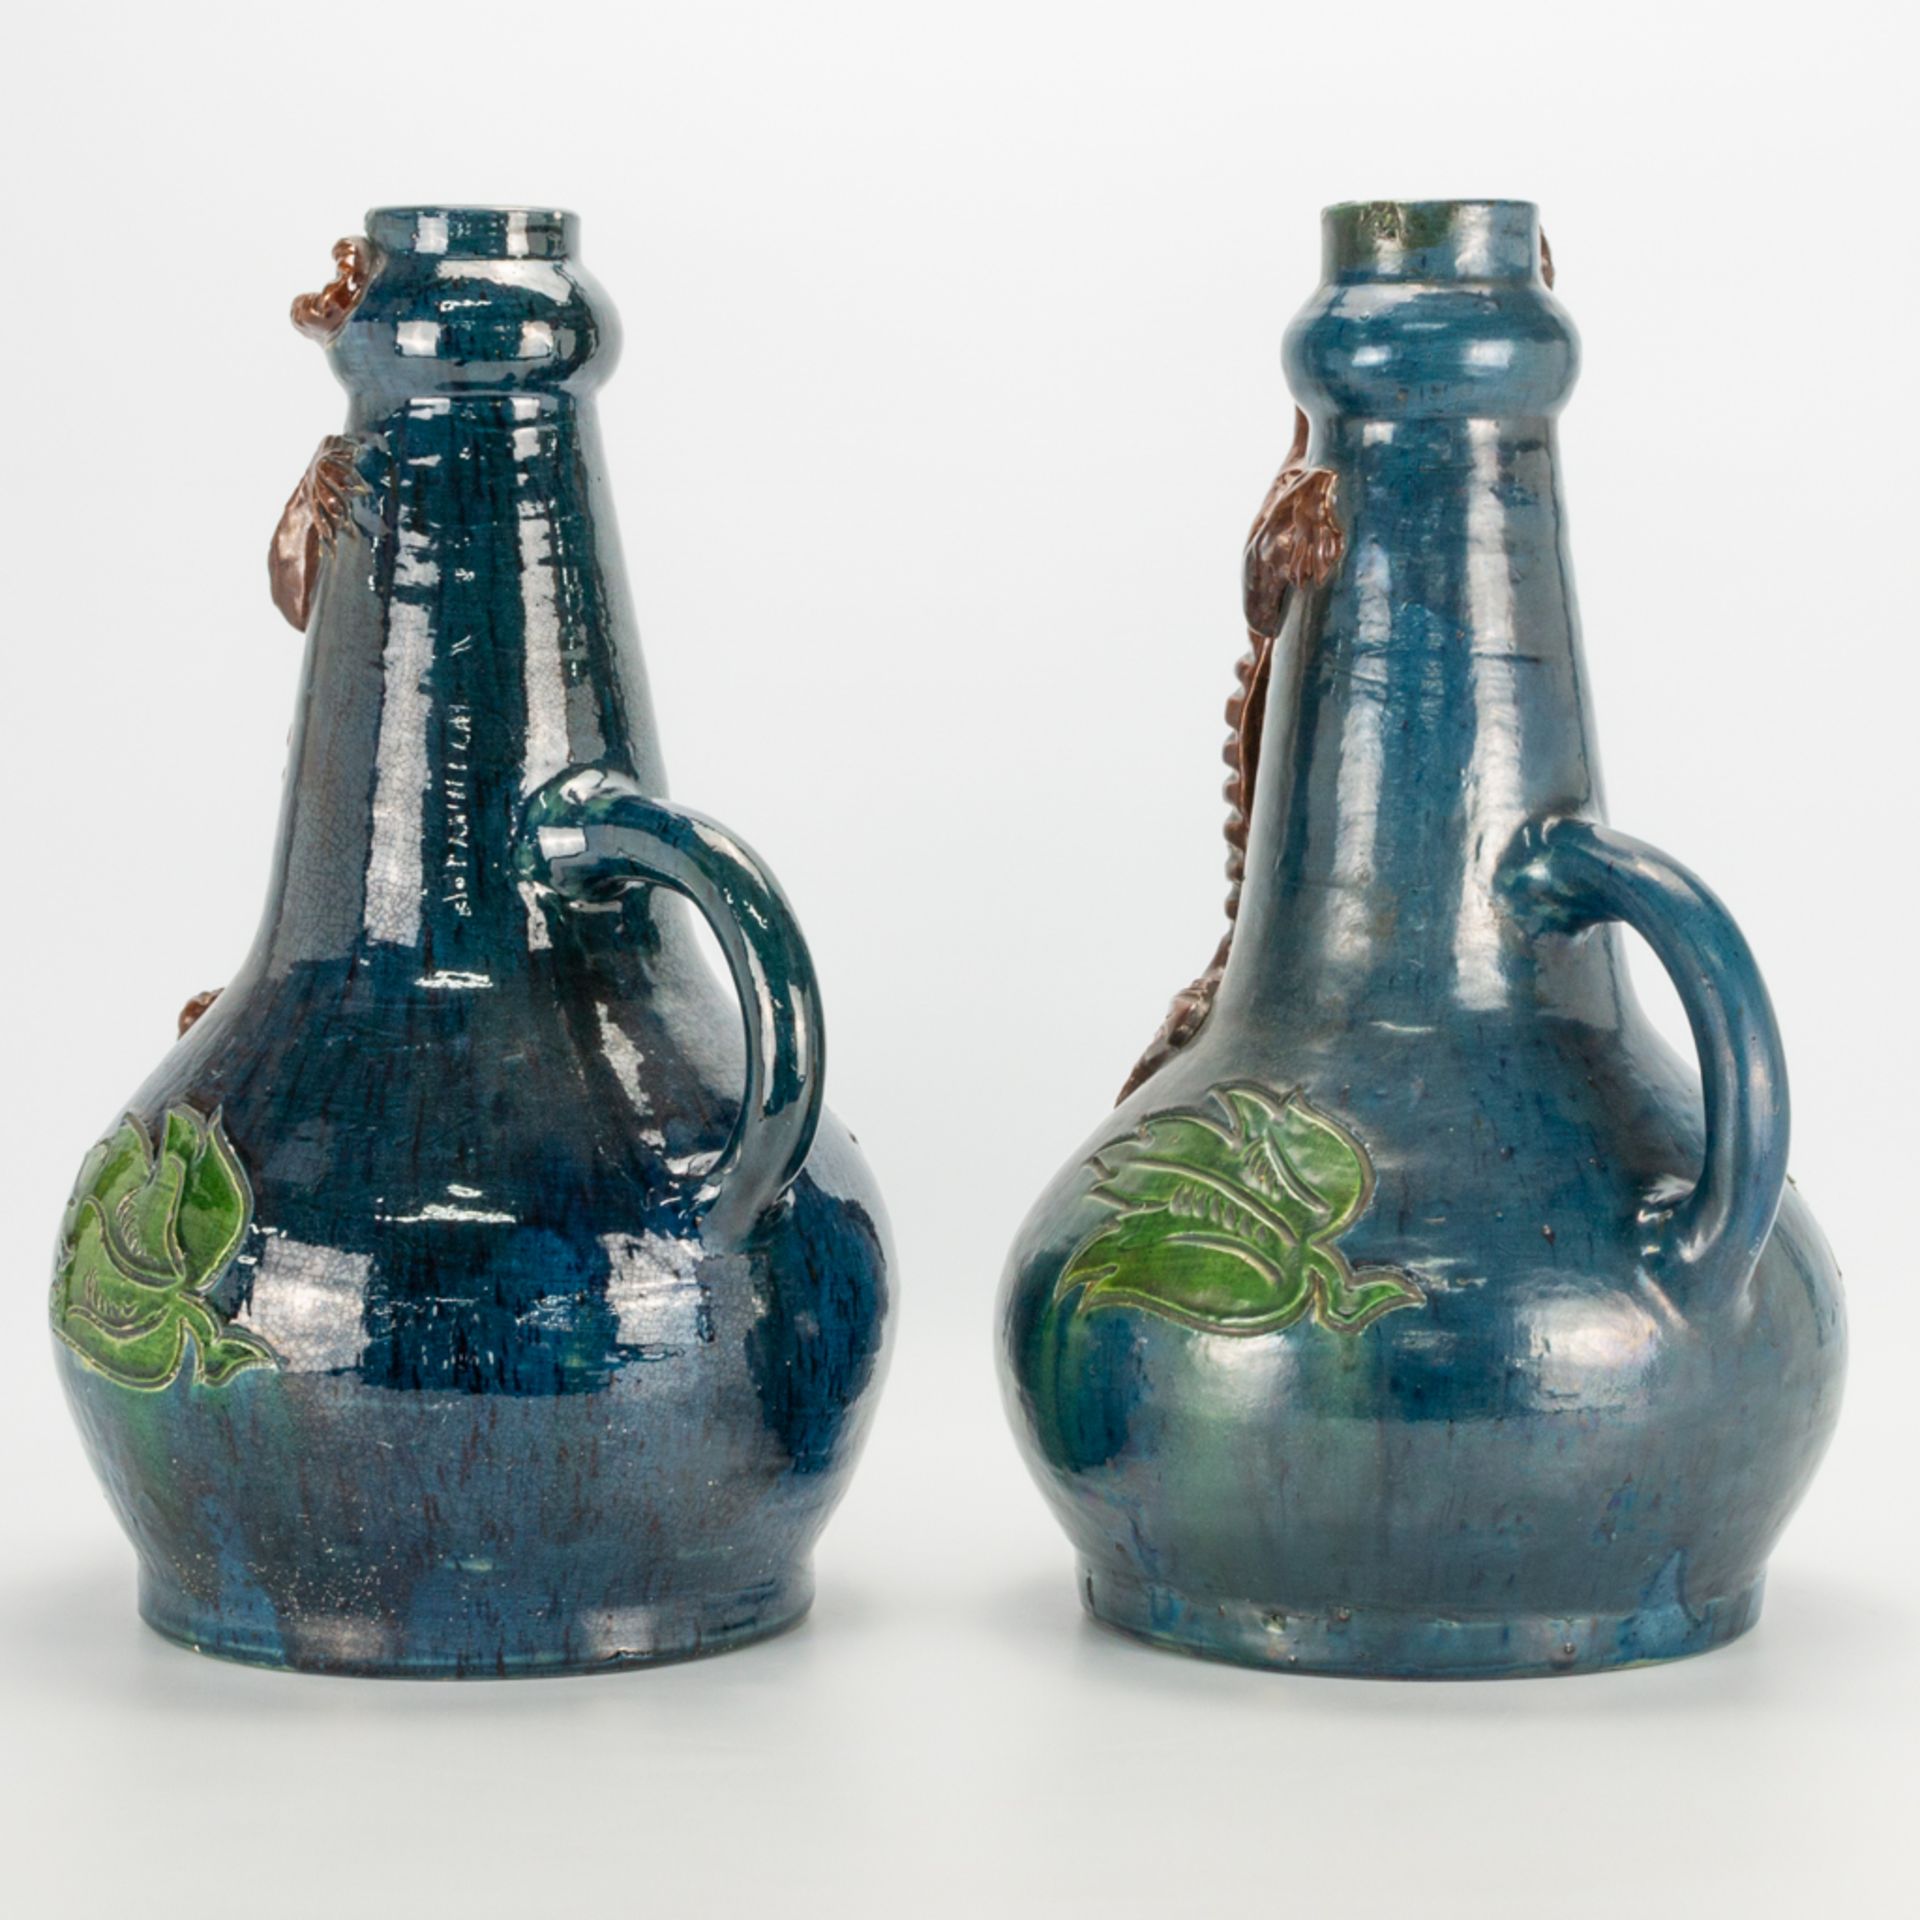 A pair of vases made in Flemish Earthenware with the decor of a salamander. (27 x 30 x 45 cm) - Image 7 of 20